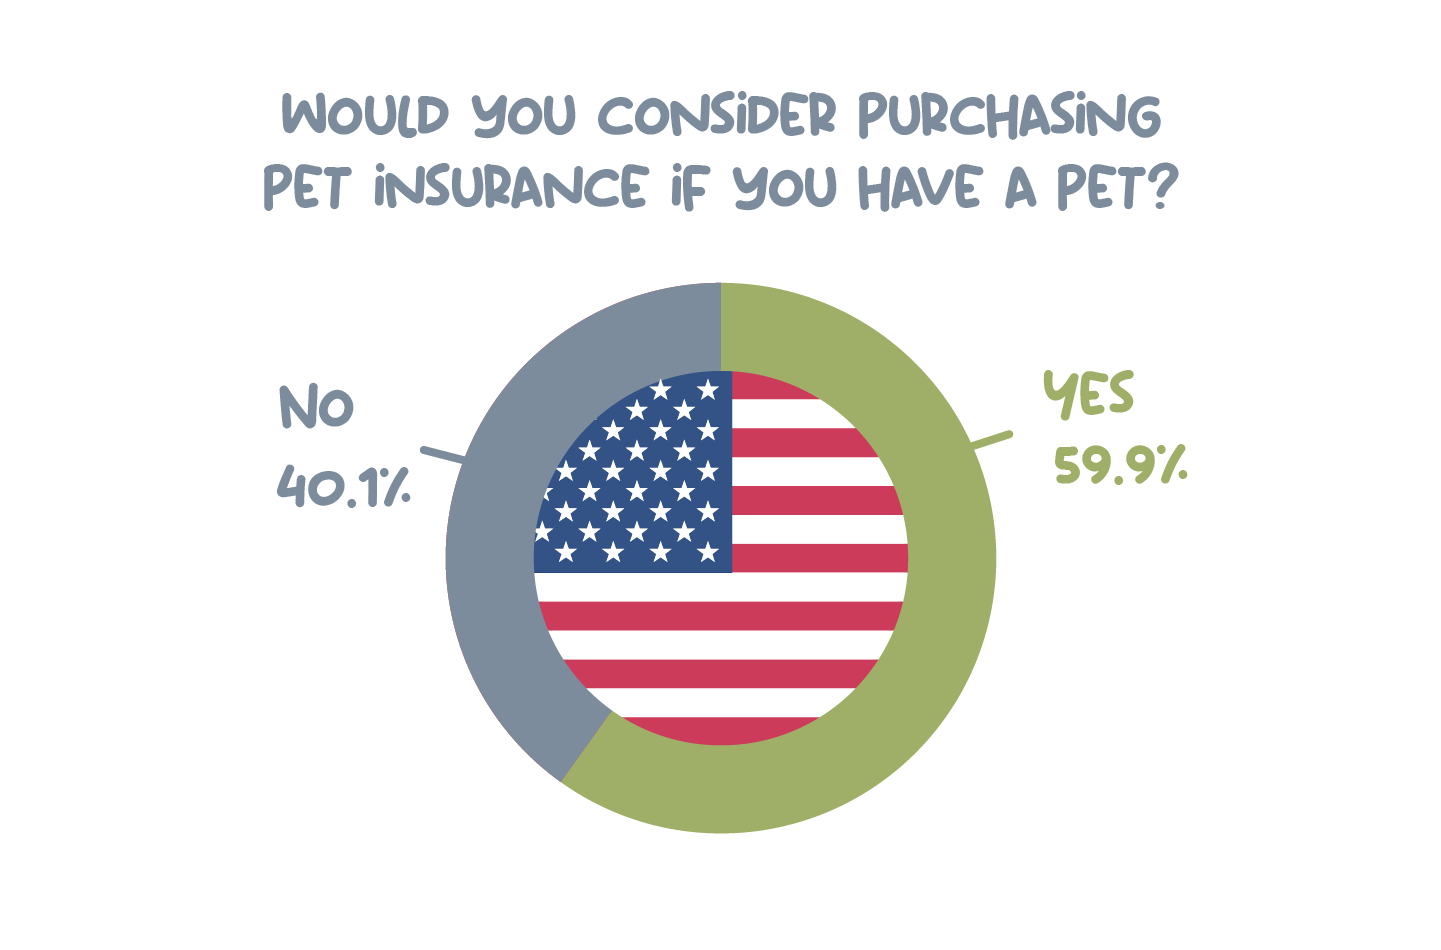 Pie chart showing the number of Americans that would consider pet insurance.